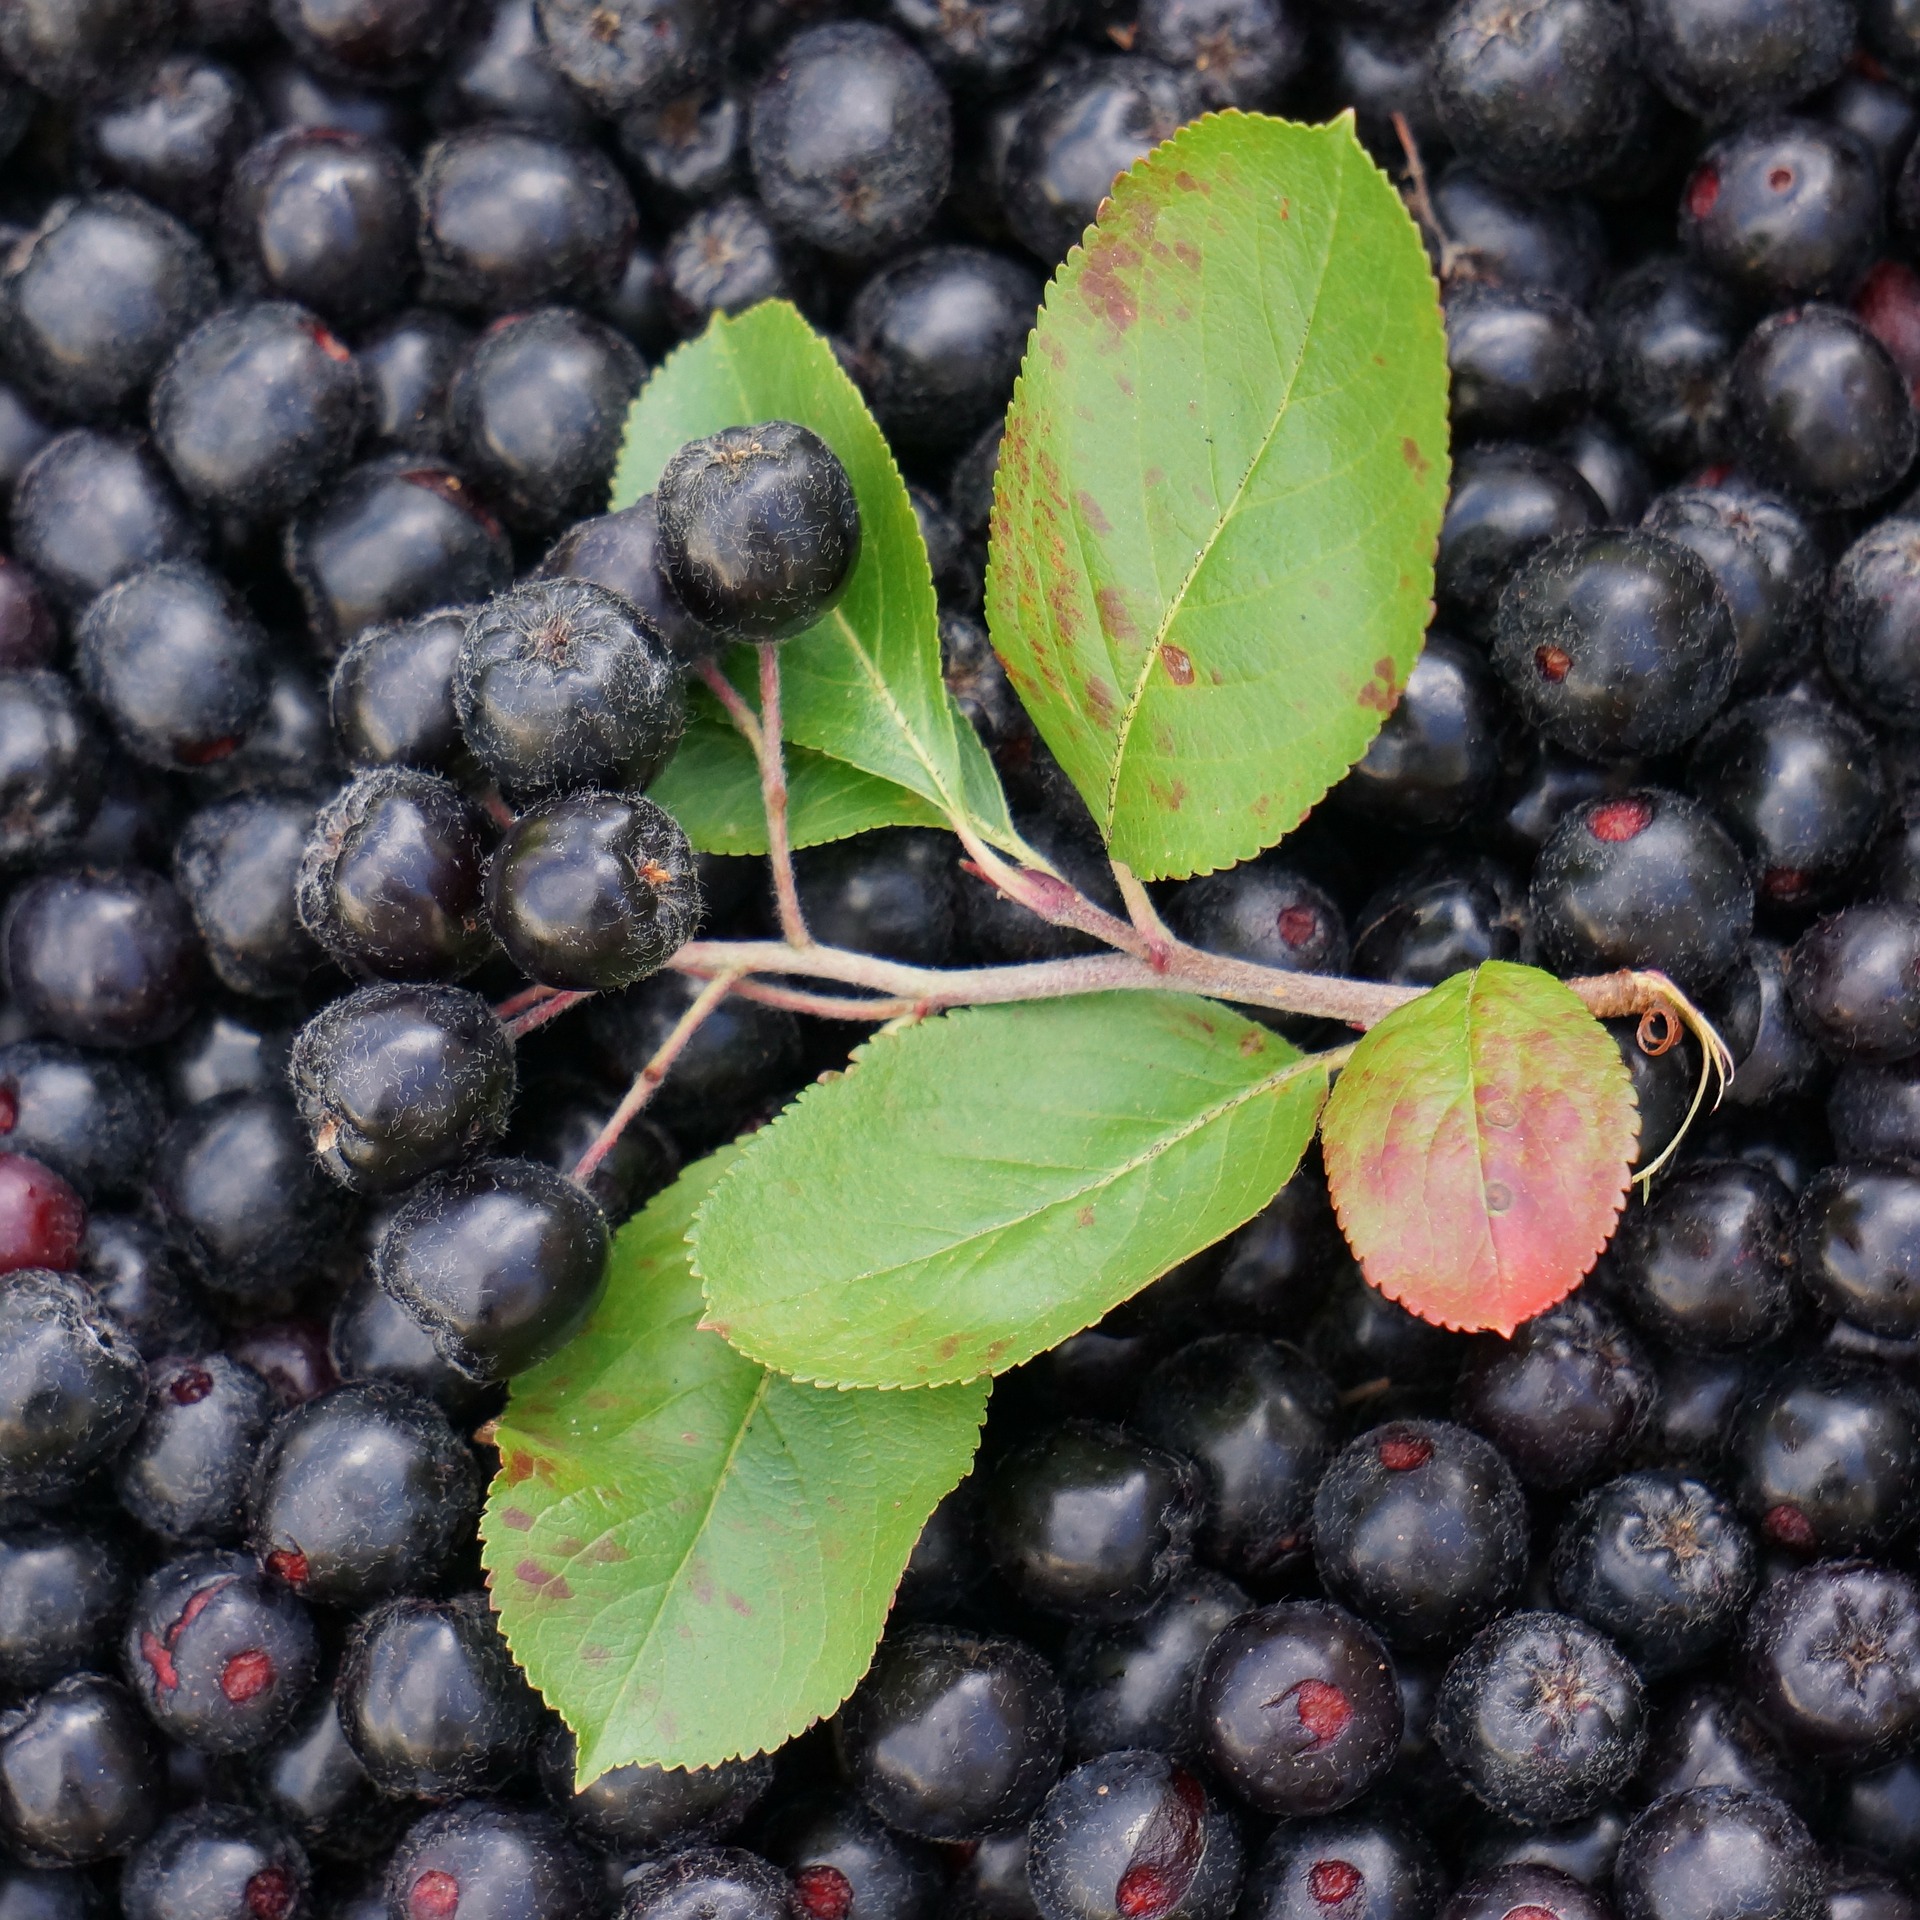 Aronia Berry Infused Bourbon Recipe D.I.Y.